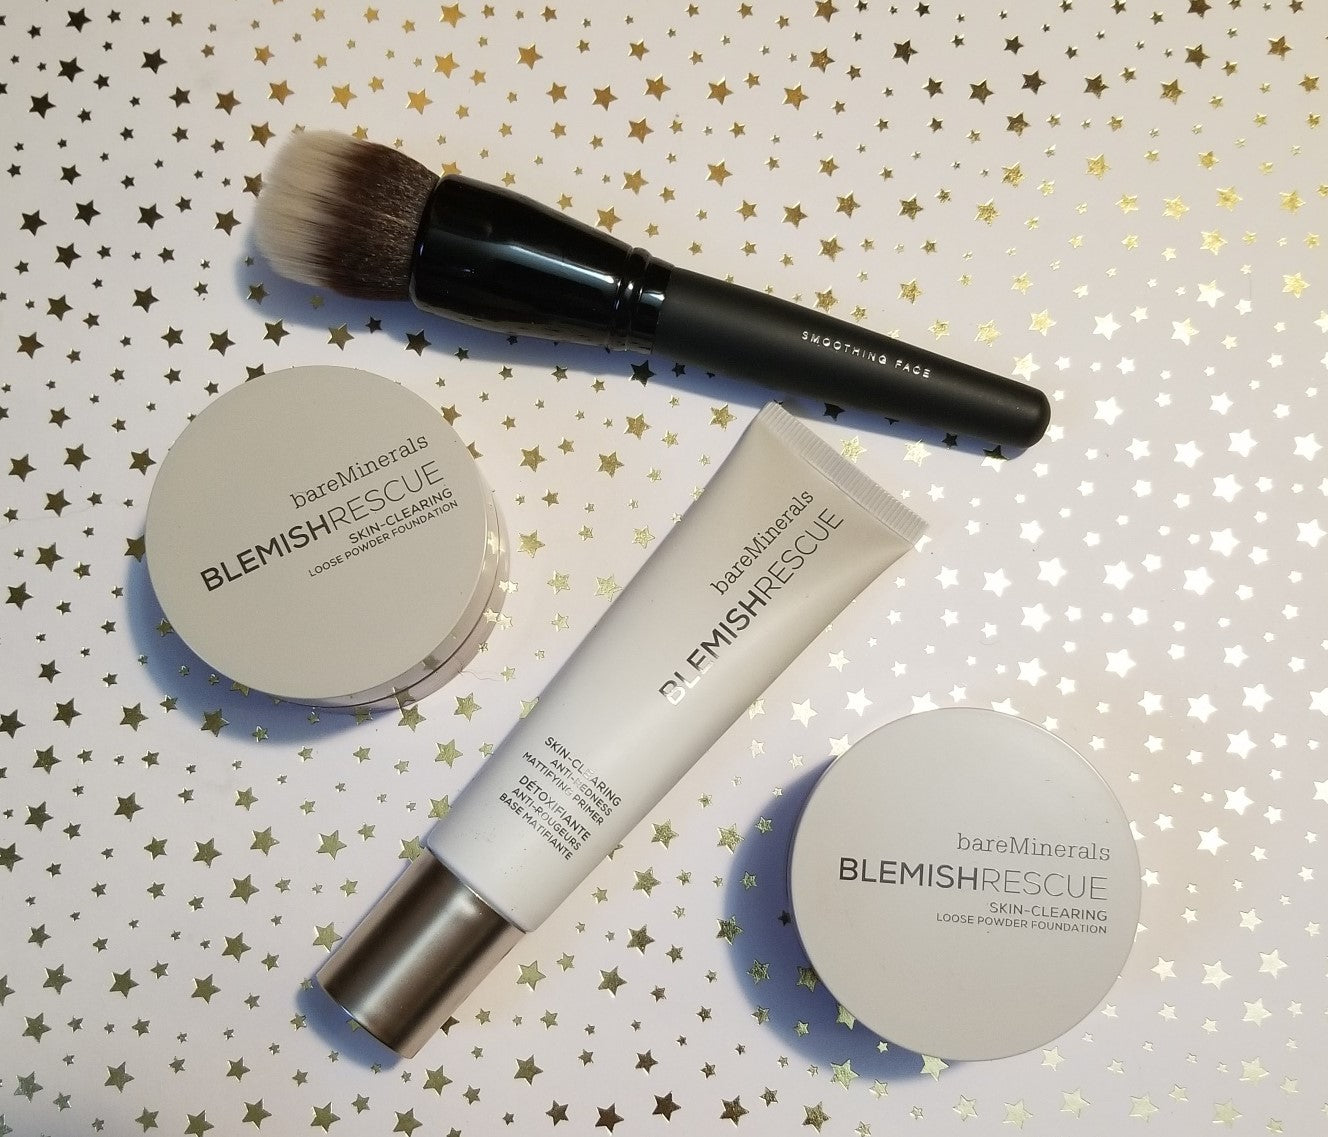 Review, Swatches, Photos, Makeup Trends 2018, 2019, 2020: Bare Minerals, Blemish Rescue Skin-Clearing Anti-Redness Mattifying Primer, Loose Powder Foundation, Smoothing Face Foundation Brush